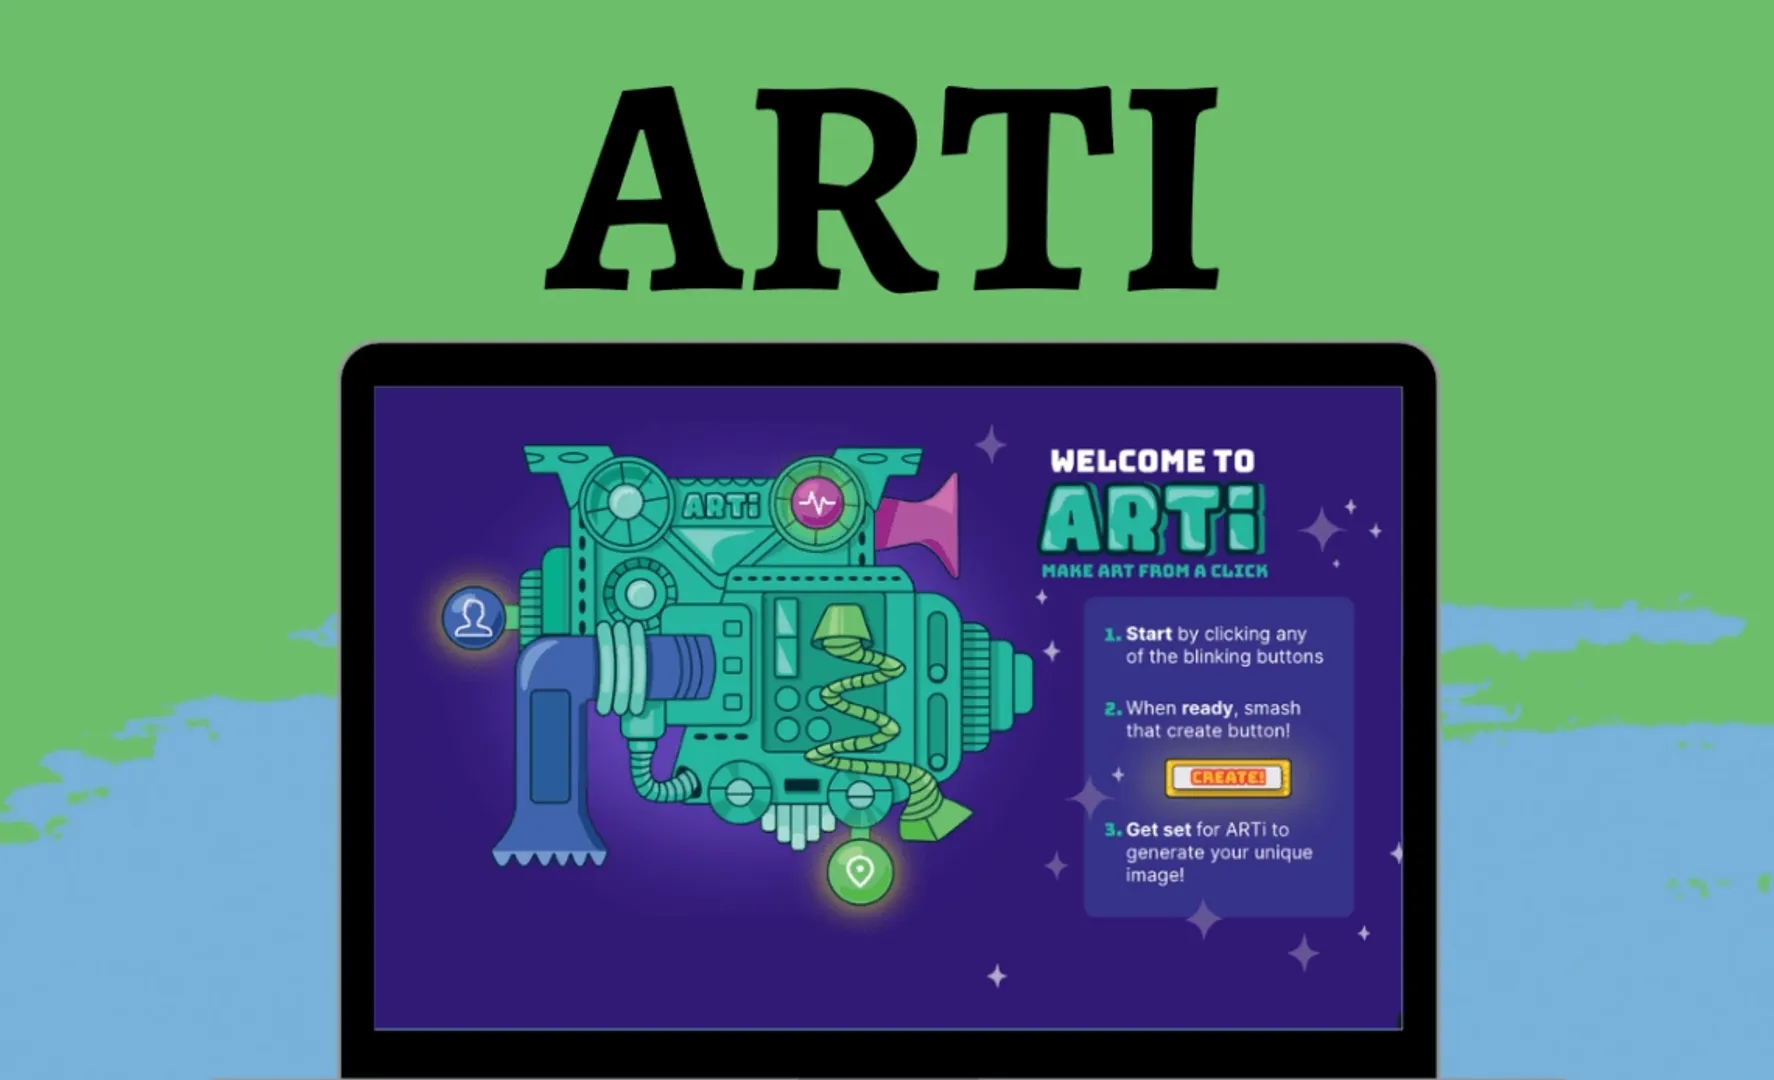 🎨🤖 Discover Two Amazing New Tools for Creativity and Content Consumption! 🚀

🌟 PlayARTi: Unleash your artistic side with PlayARTi, a free AI art creator. Generate unique artworks from various sources, customize them, and express your creativity effortlessly. 

Check out the full review: https://webthat.io/playarti/ 🎨✨

💬 Poe: Upgrade your digital content experience with Poe, the AI chatbot platform. Enjoy advanced curation and personalization features while maintaining your privacy. 

Say goodbye to ads and explore the full review: https://webthat.io/poe/ 💻🔒

🔍 Don't miss the chance to try these innovative tools and share your thoughts in the comments! Let your creativity soar and enhance your digital content consumption.